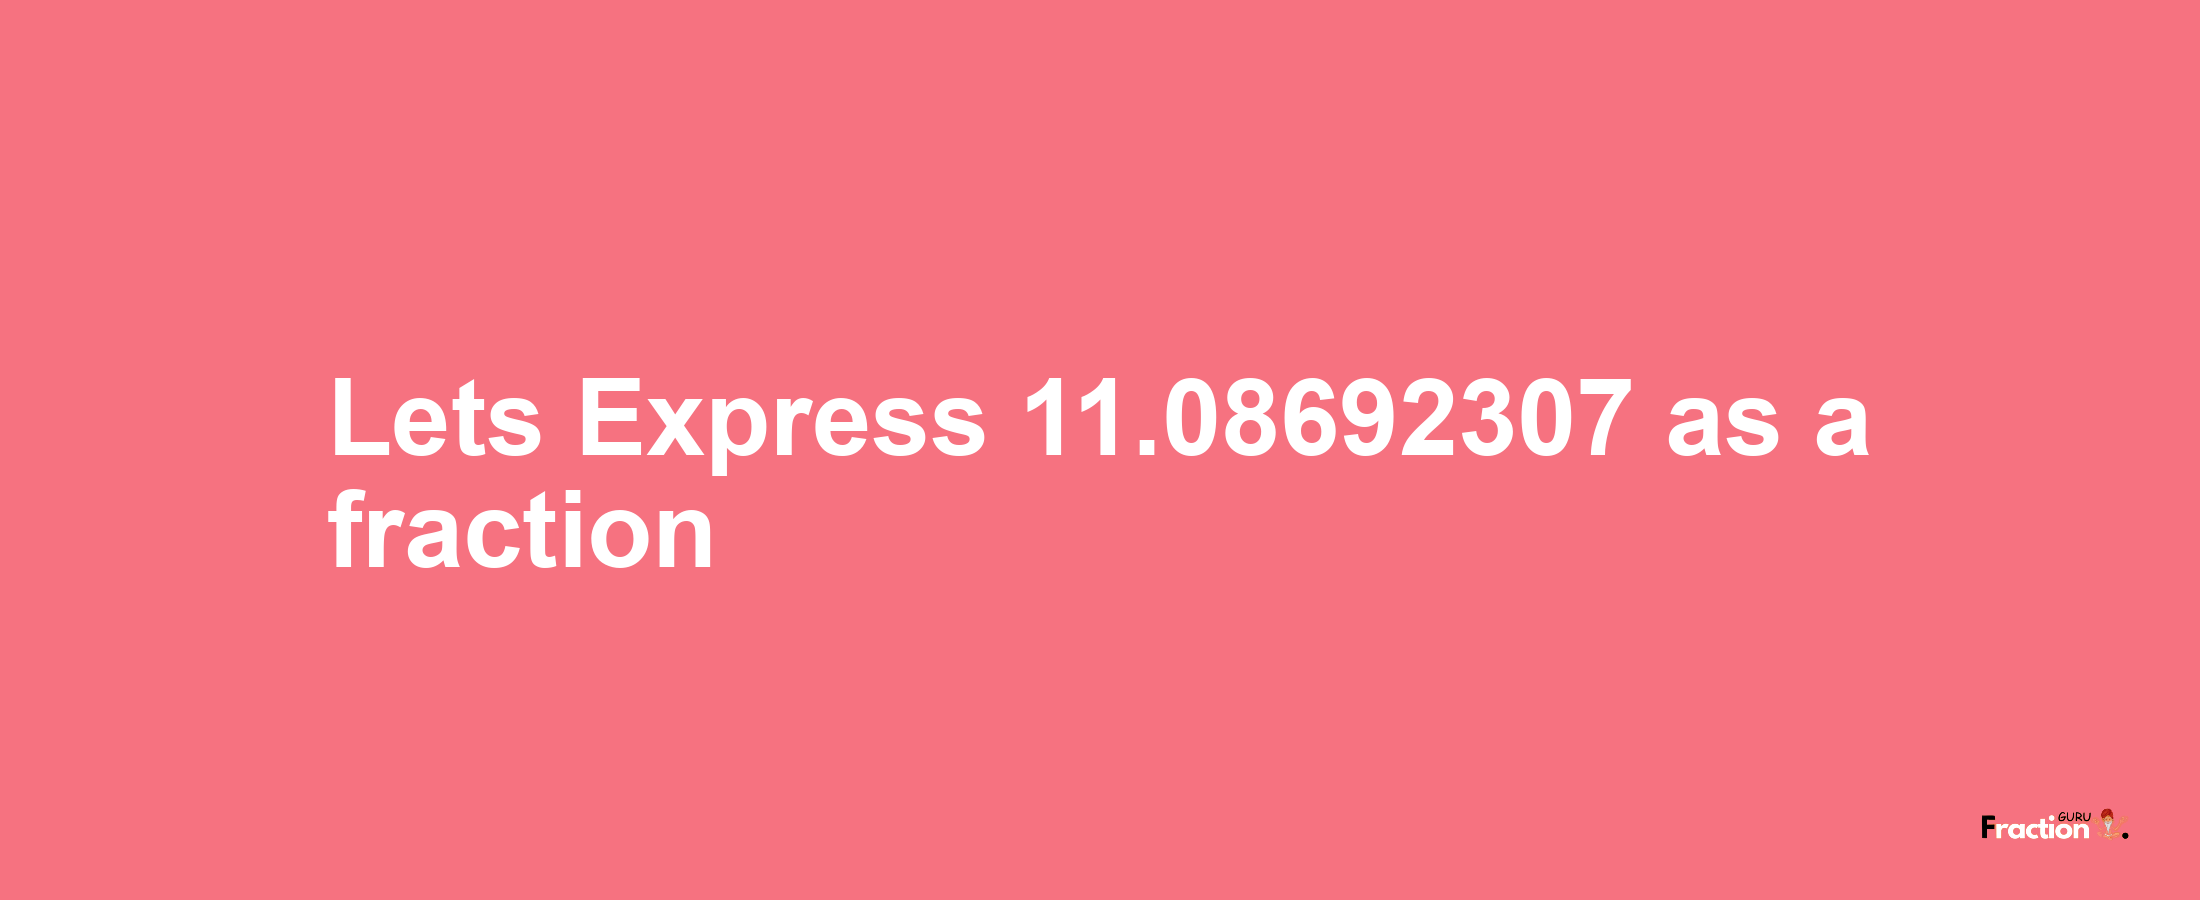 Lets Express 11.08692307 as afraction